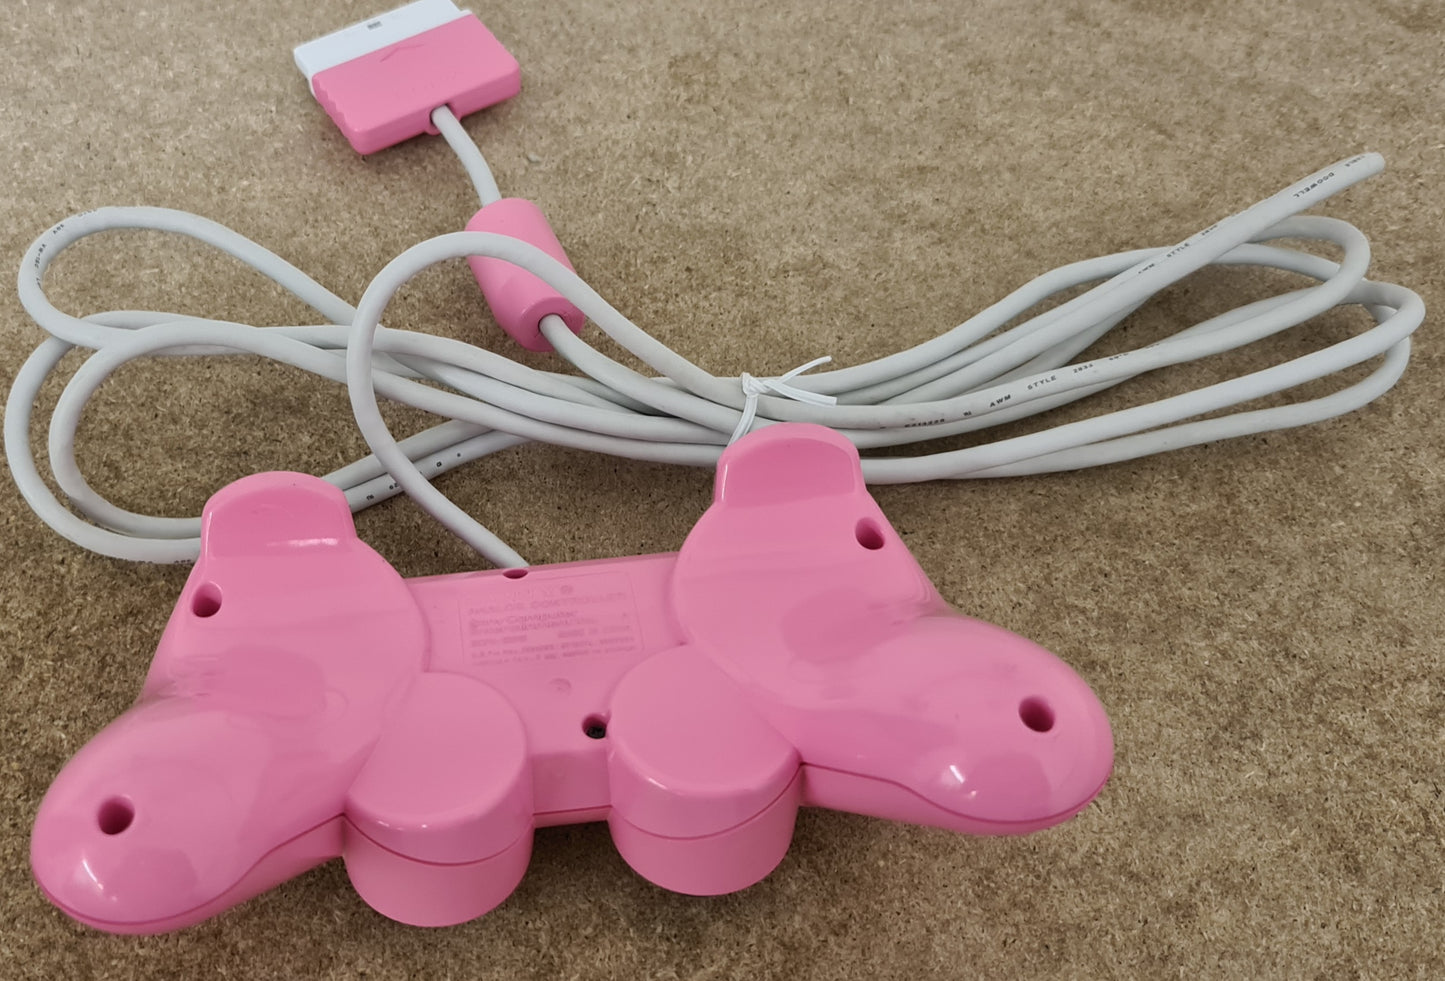 Official Pink Sony Playstation 2 (PS2) Controller Accessory